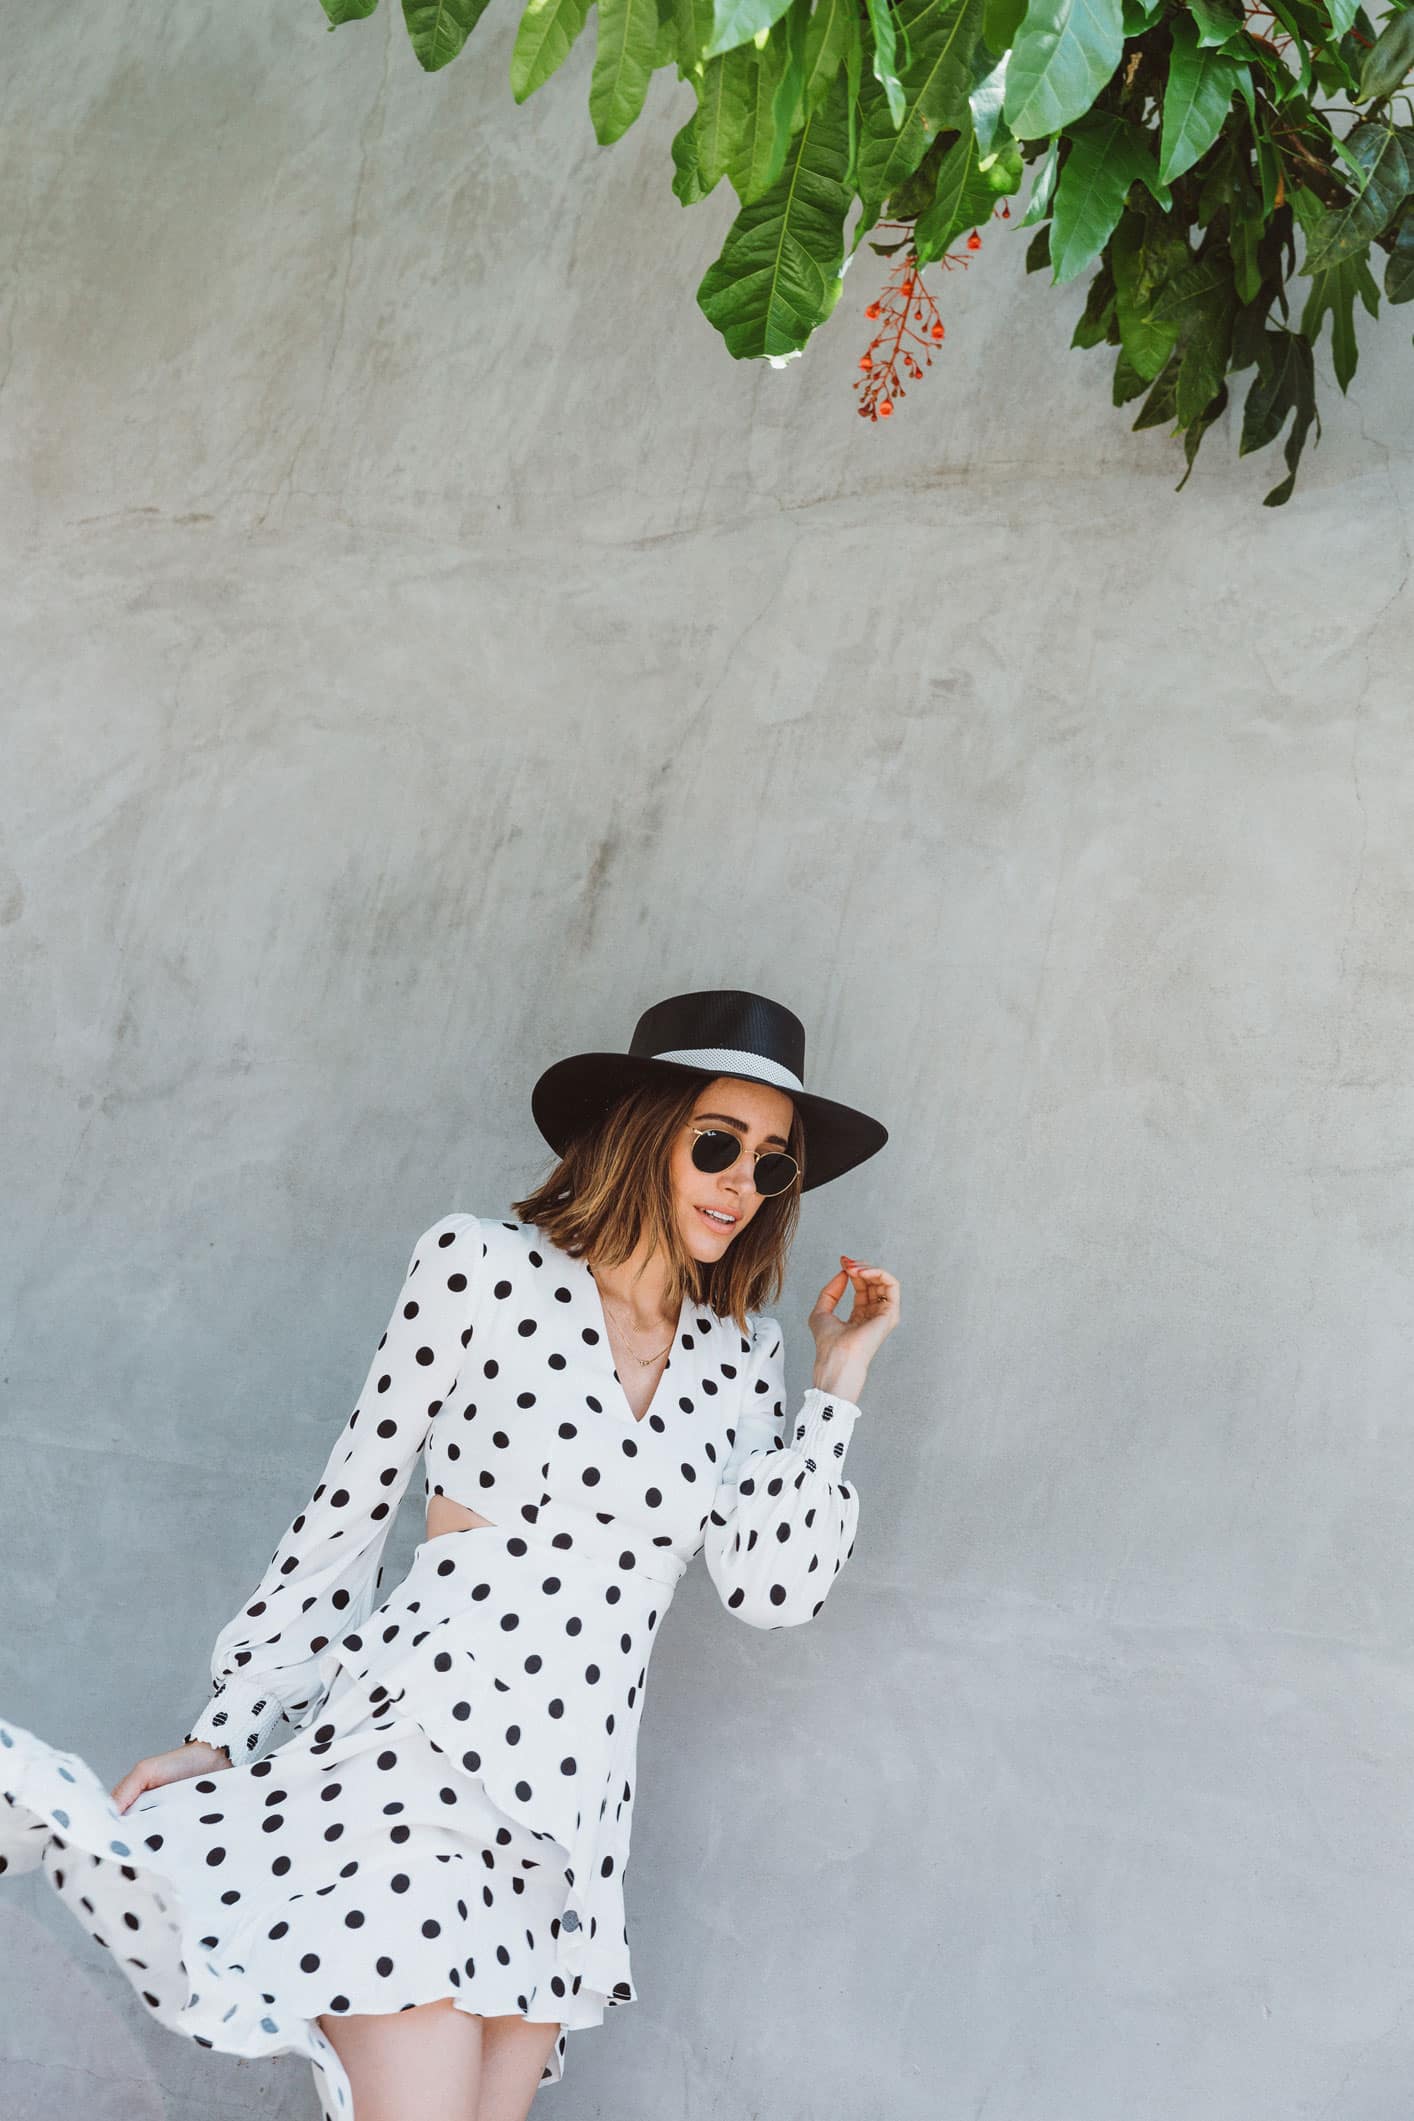 Louise Roe wearing summer polka dot dress and leather mules